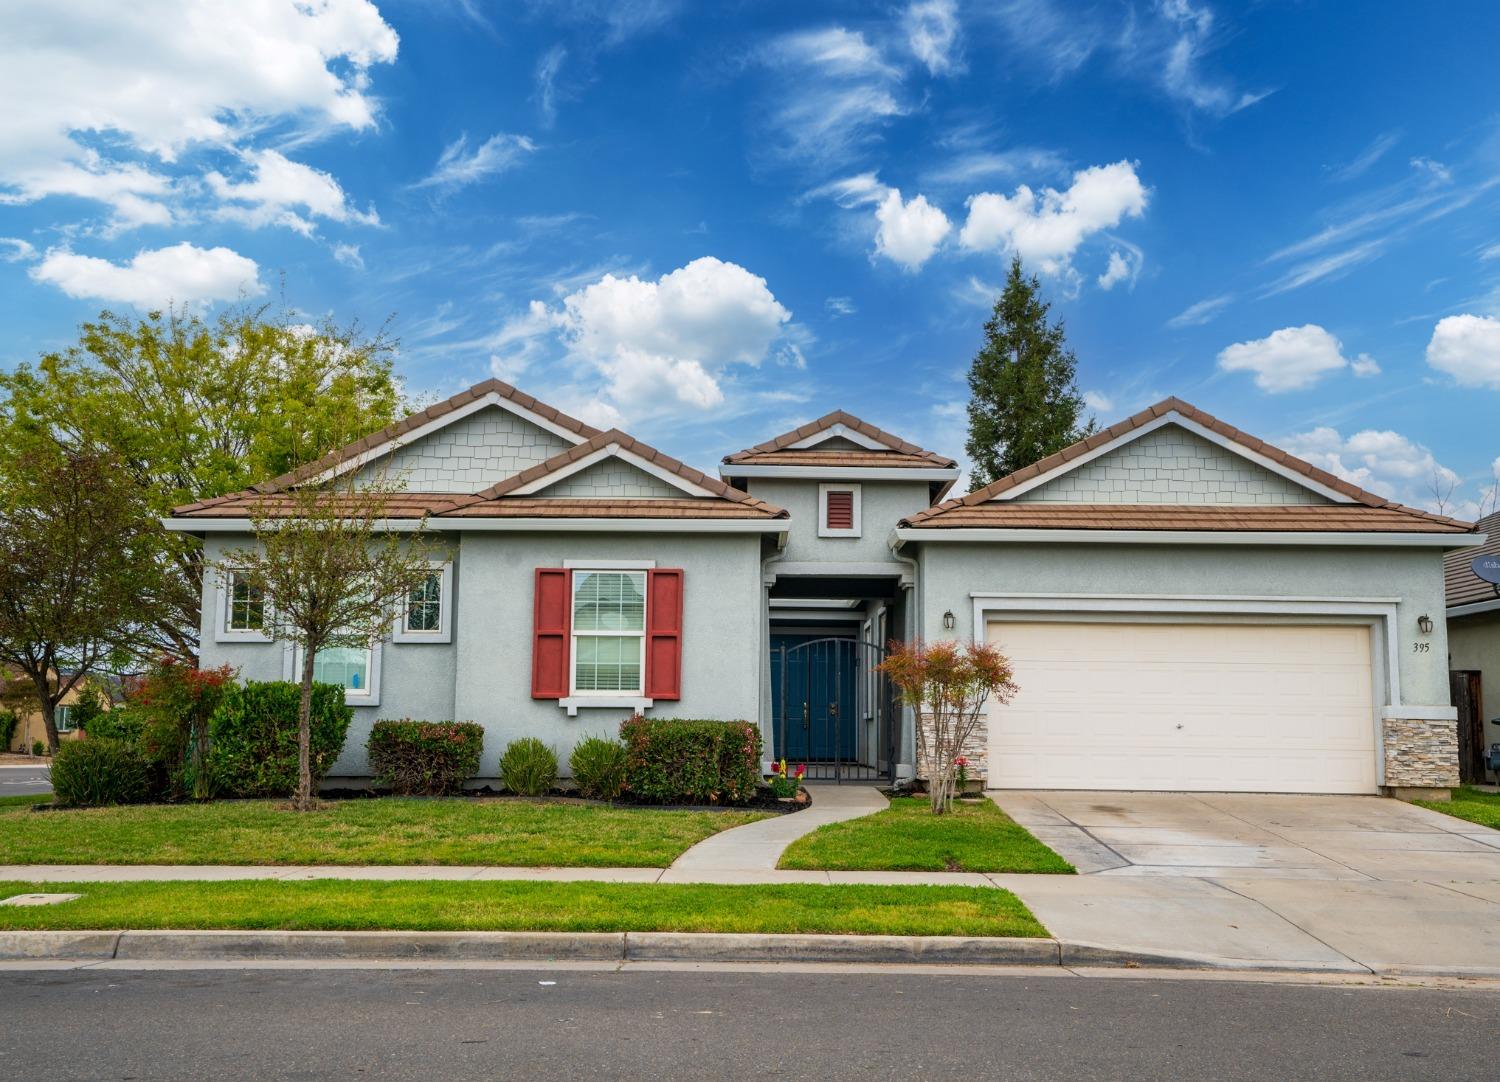 Photo of 395 Hearst Dr in Merced, CA